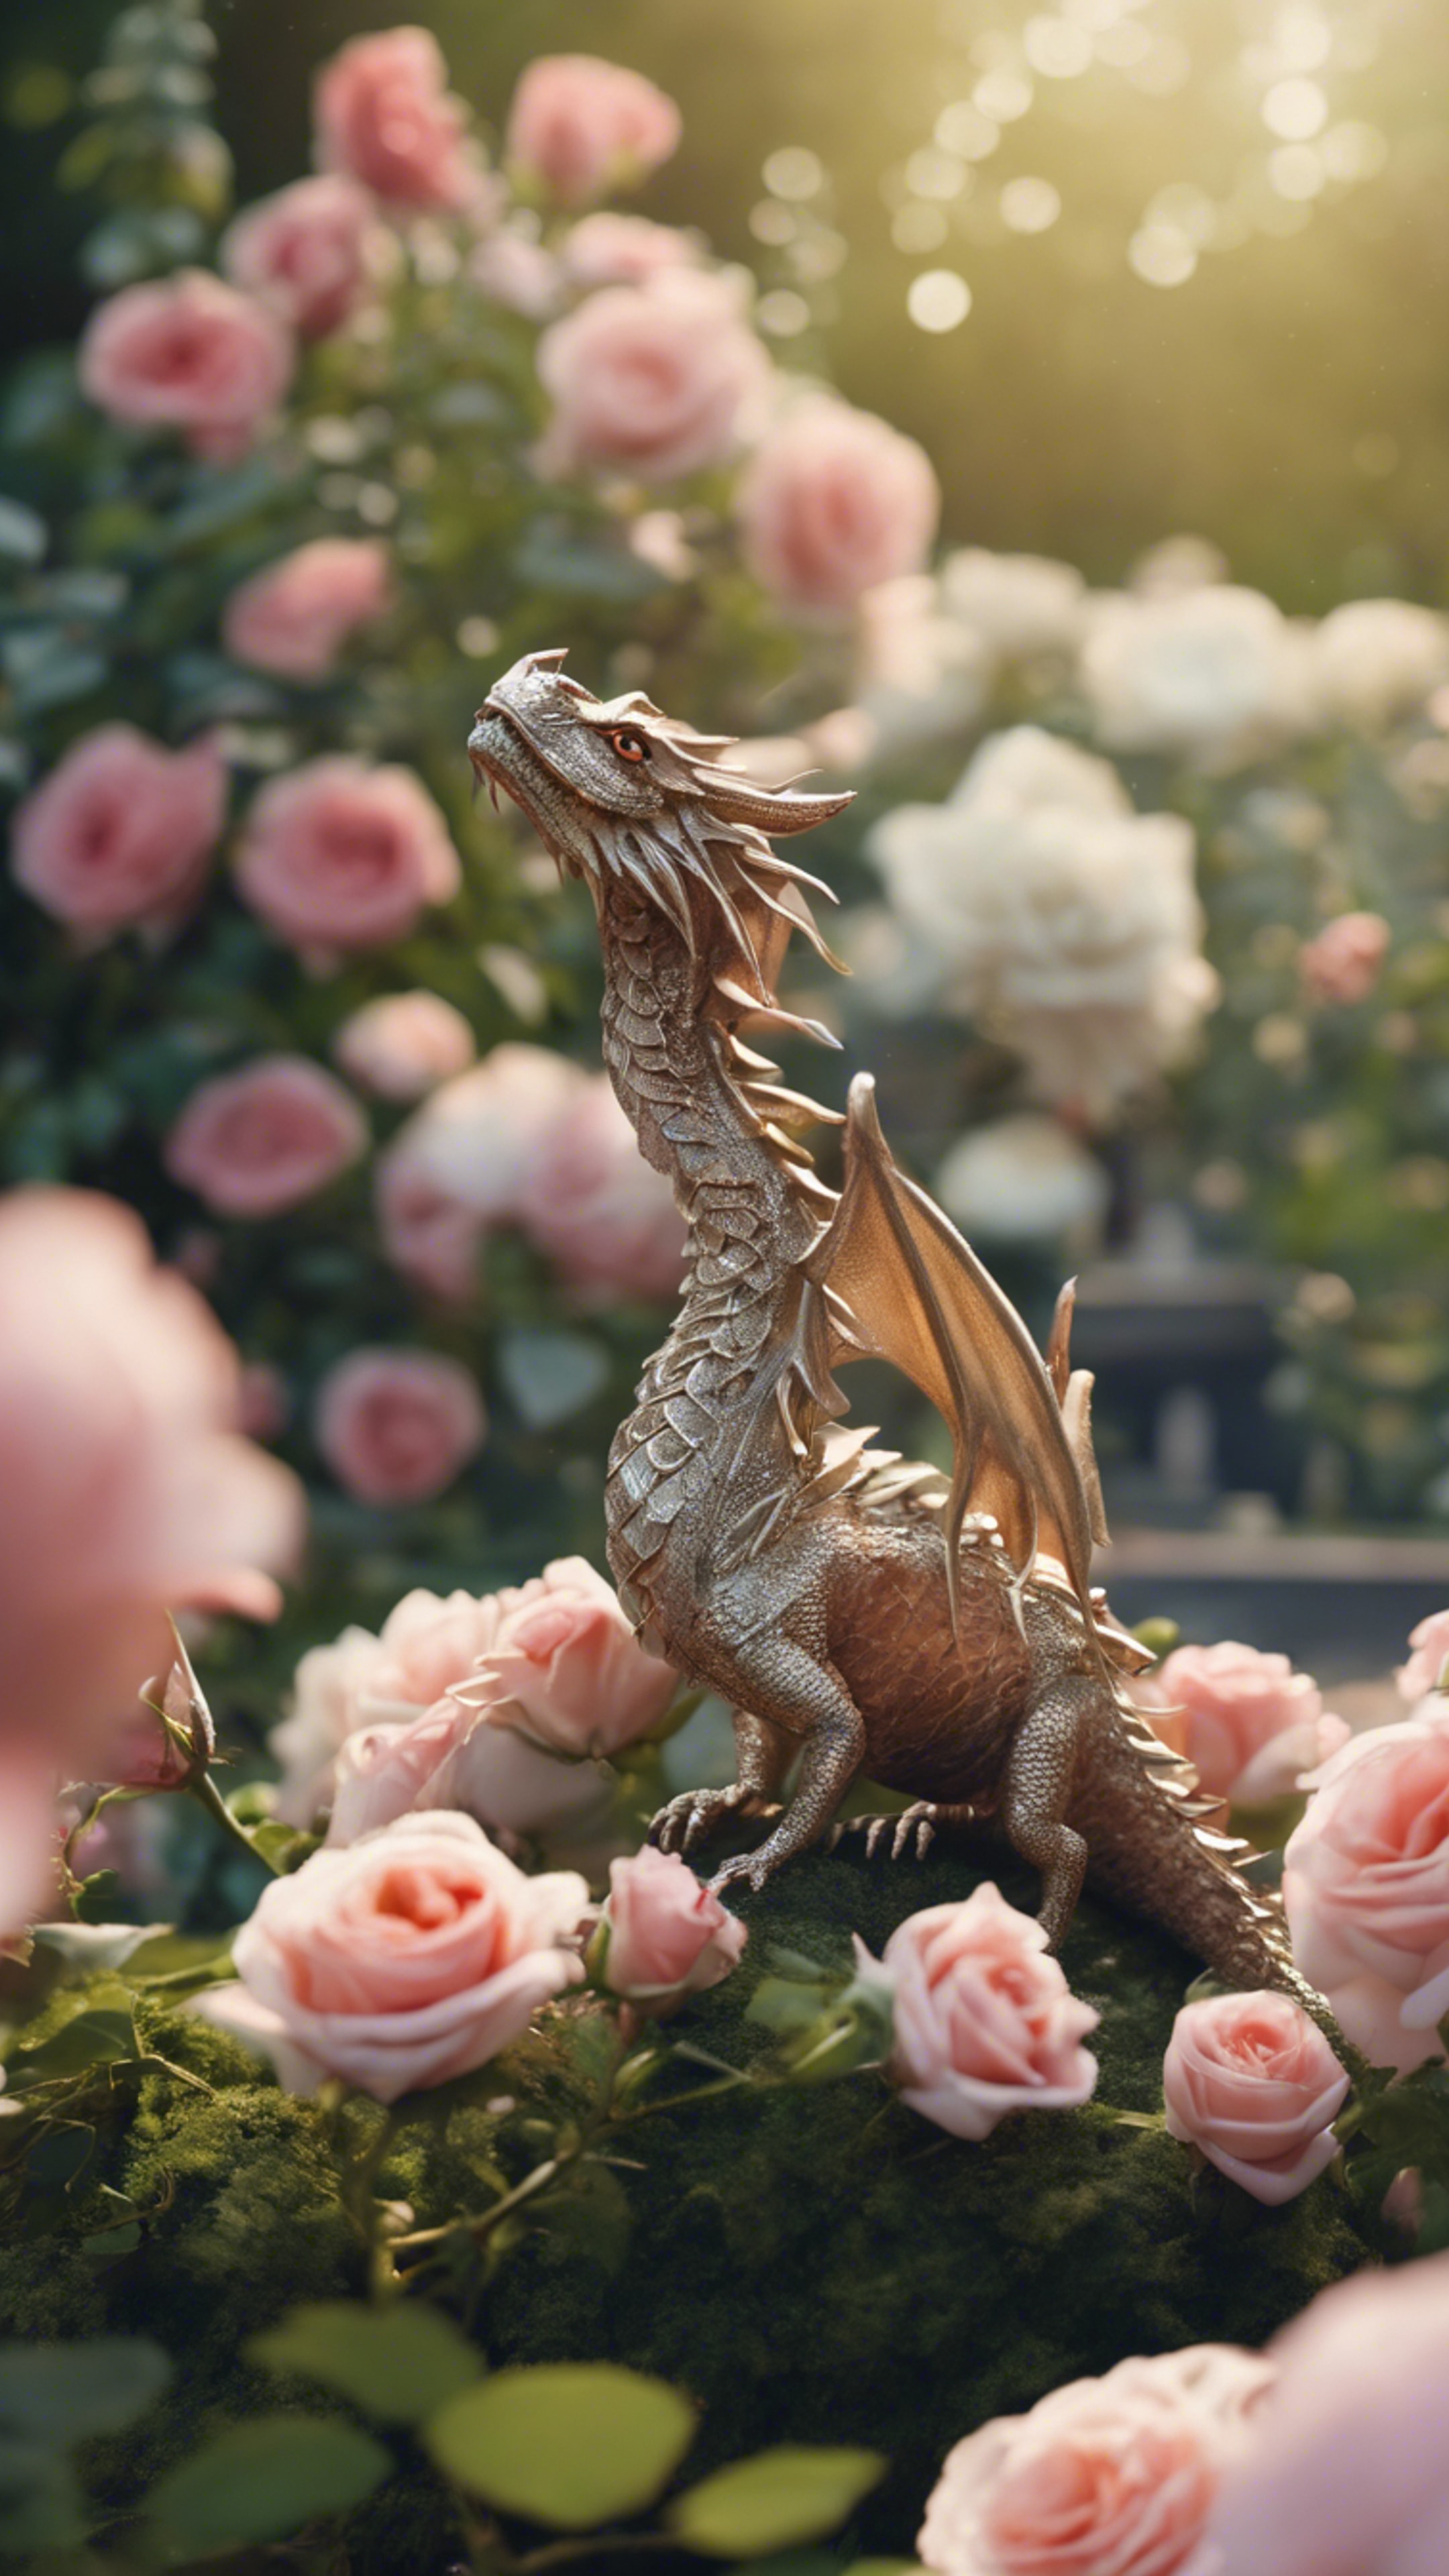 A peaceful garden scene with a tiny, delicate dragon hovering over blooming roses. 墙纸[938d180fa7284dedb4af]